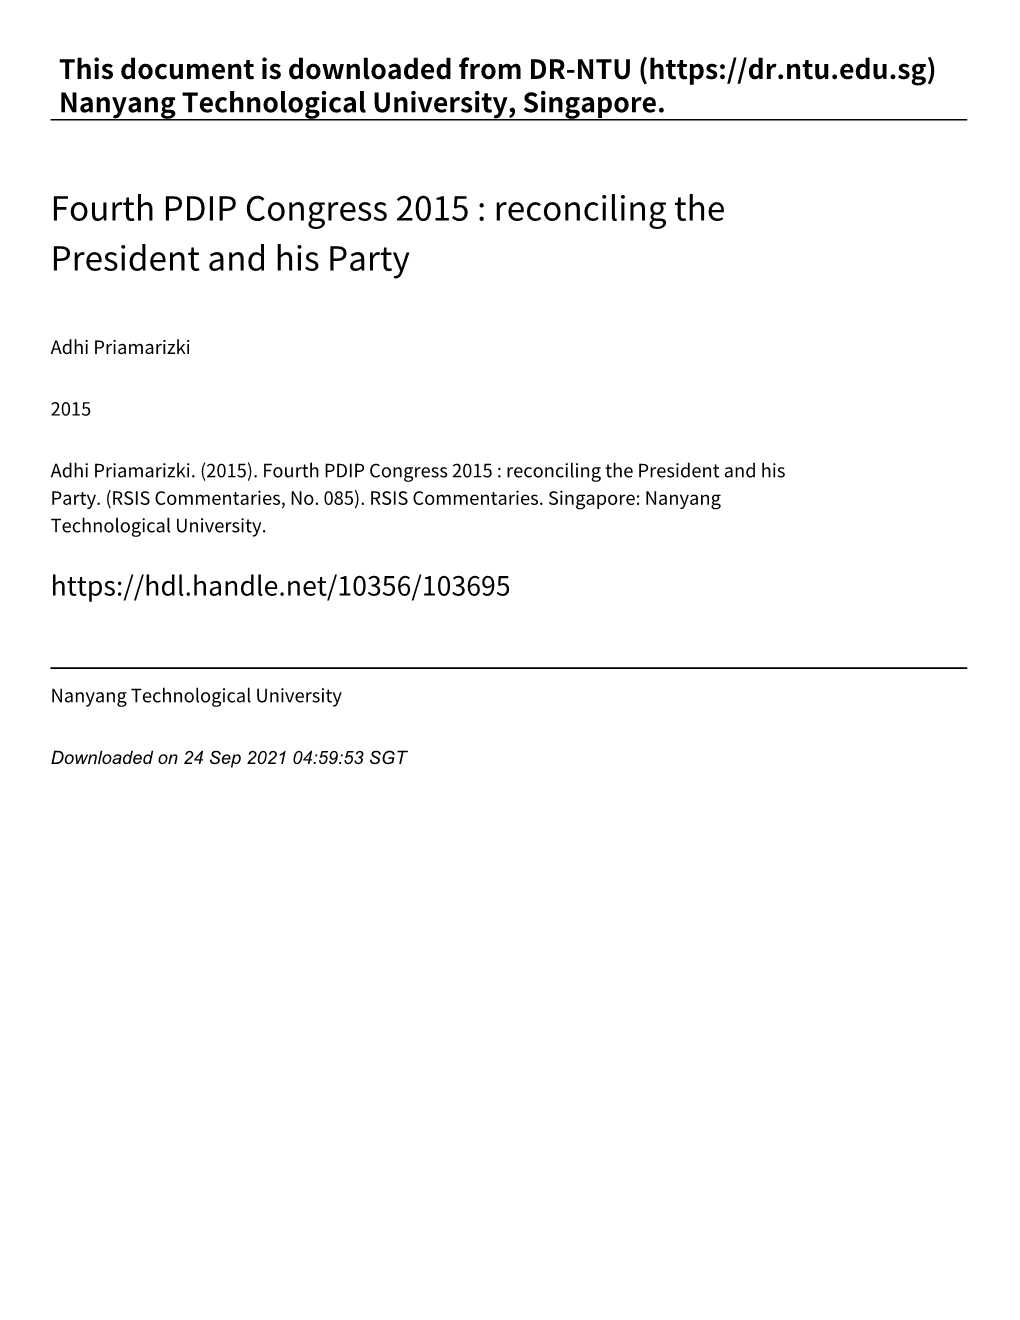 Fourth PDIP Congress 2015 : Reconciling the President and His Party